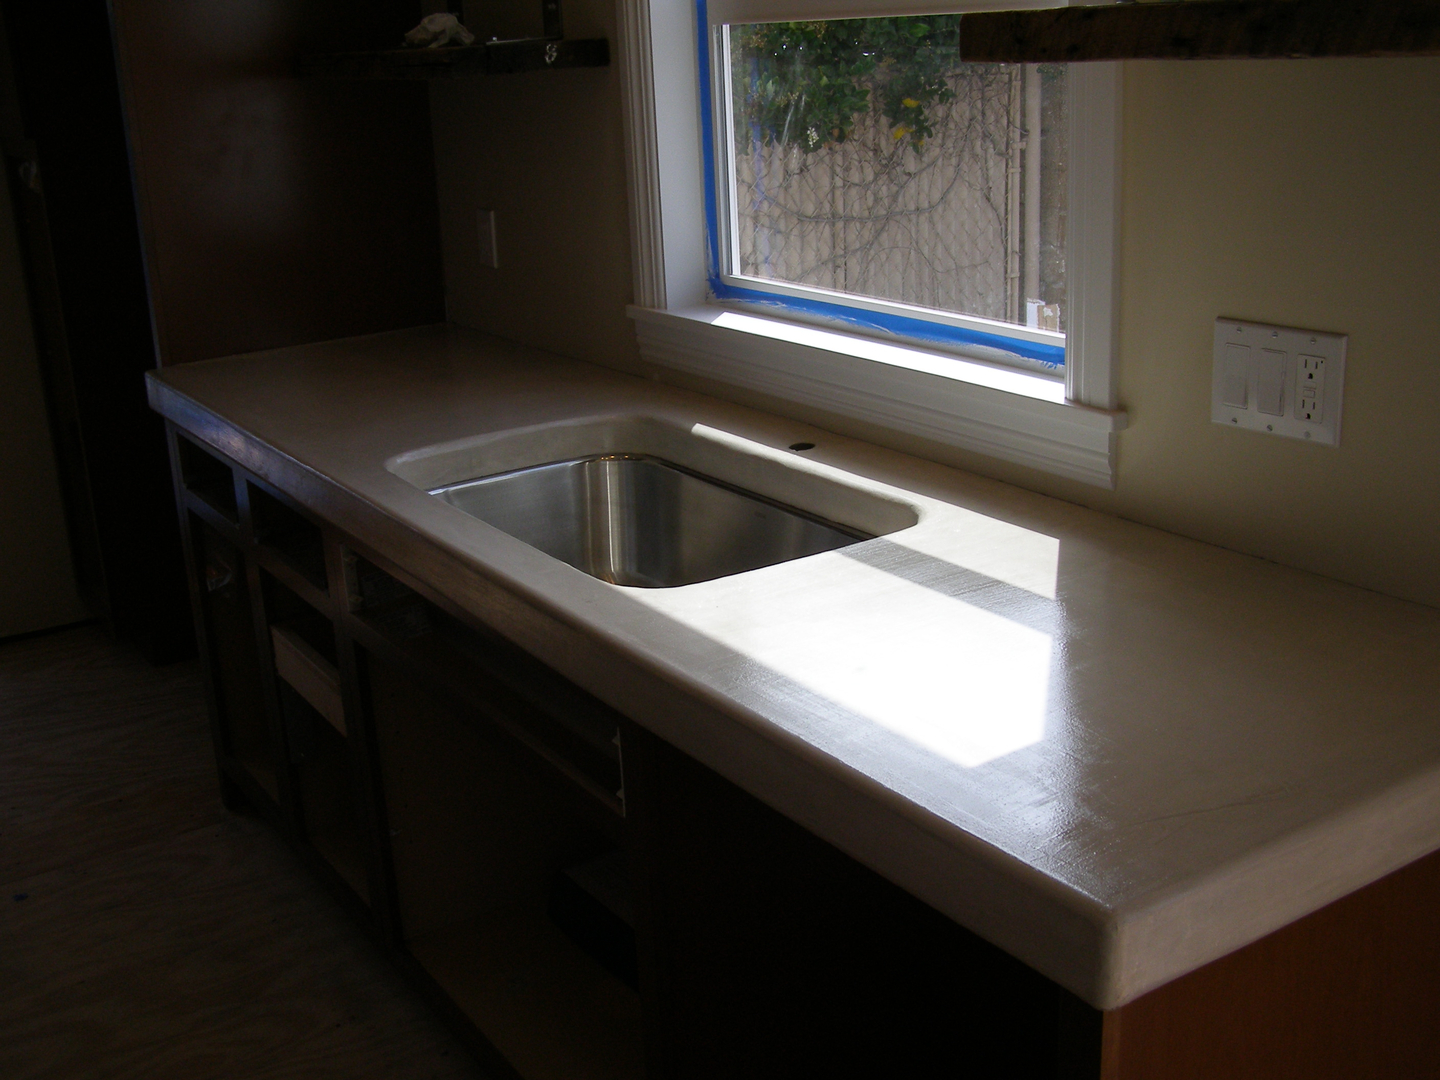 A Stainless Steel Sink Infront of a Glass Window